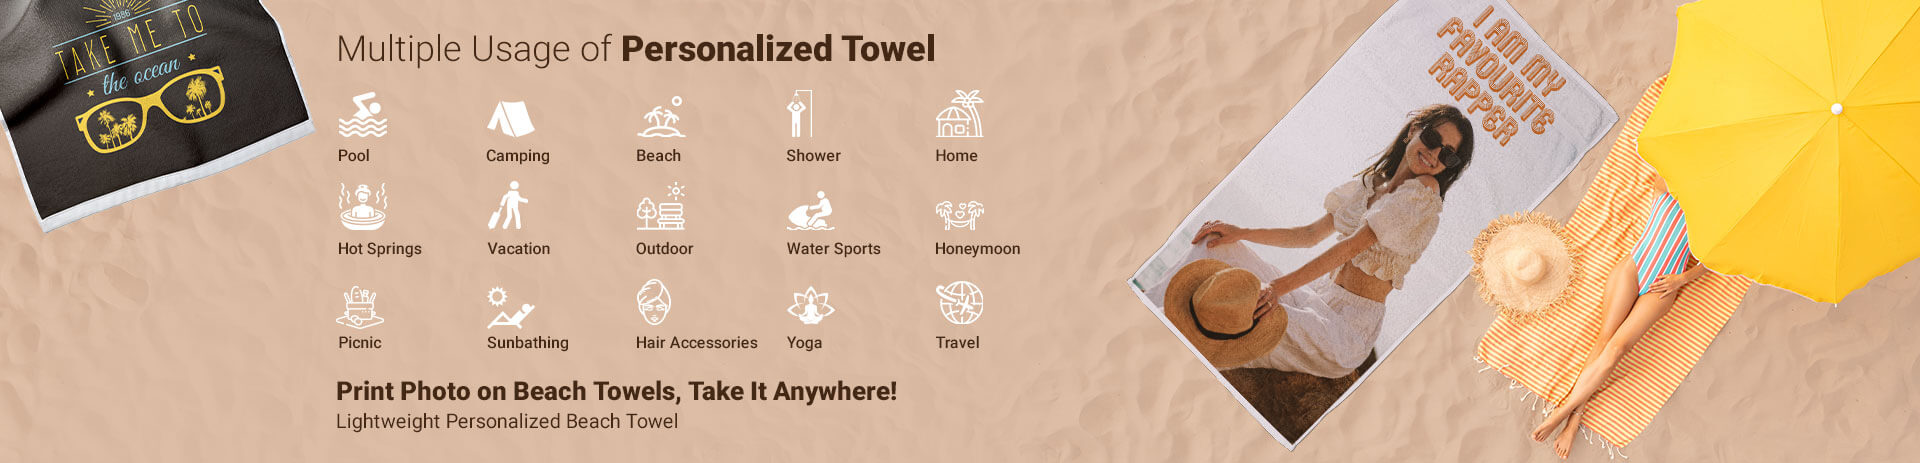 Multiple Usage of Personalized Towel